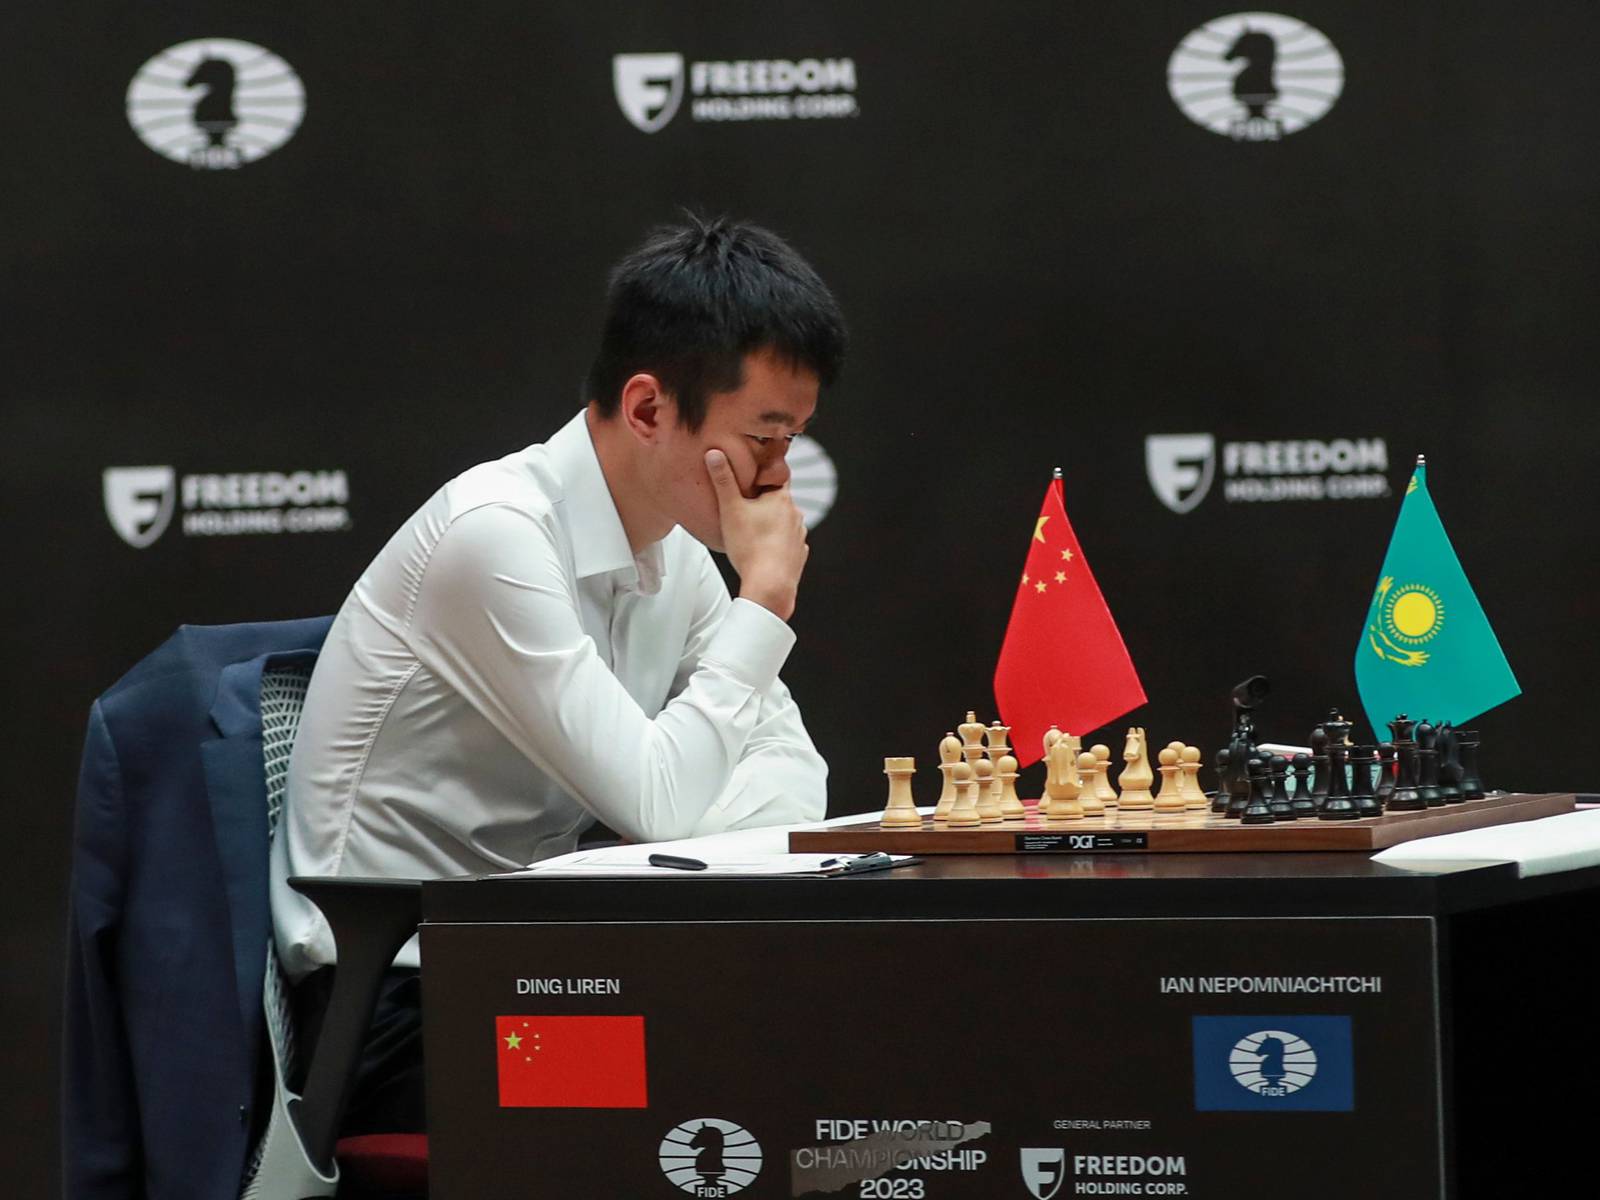 Chess.com on X: The moment Ding Liren became the FIDE World